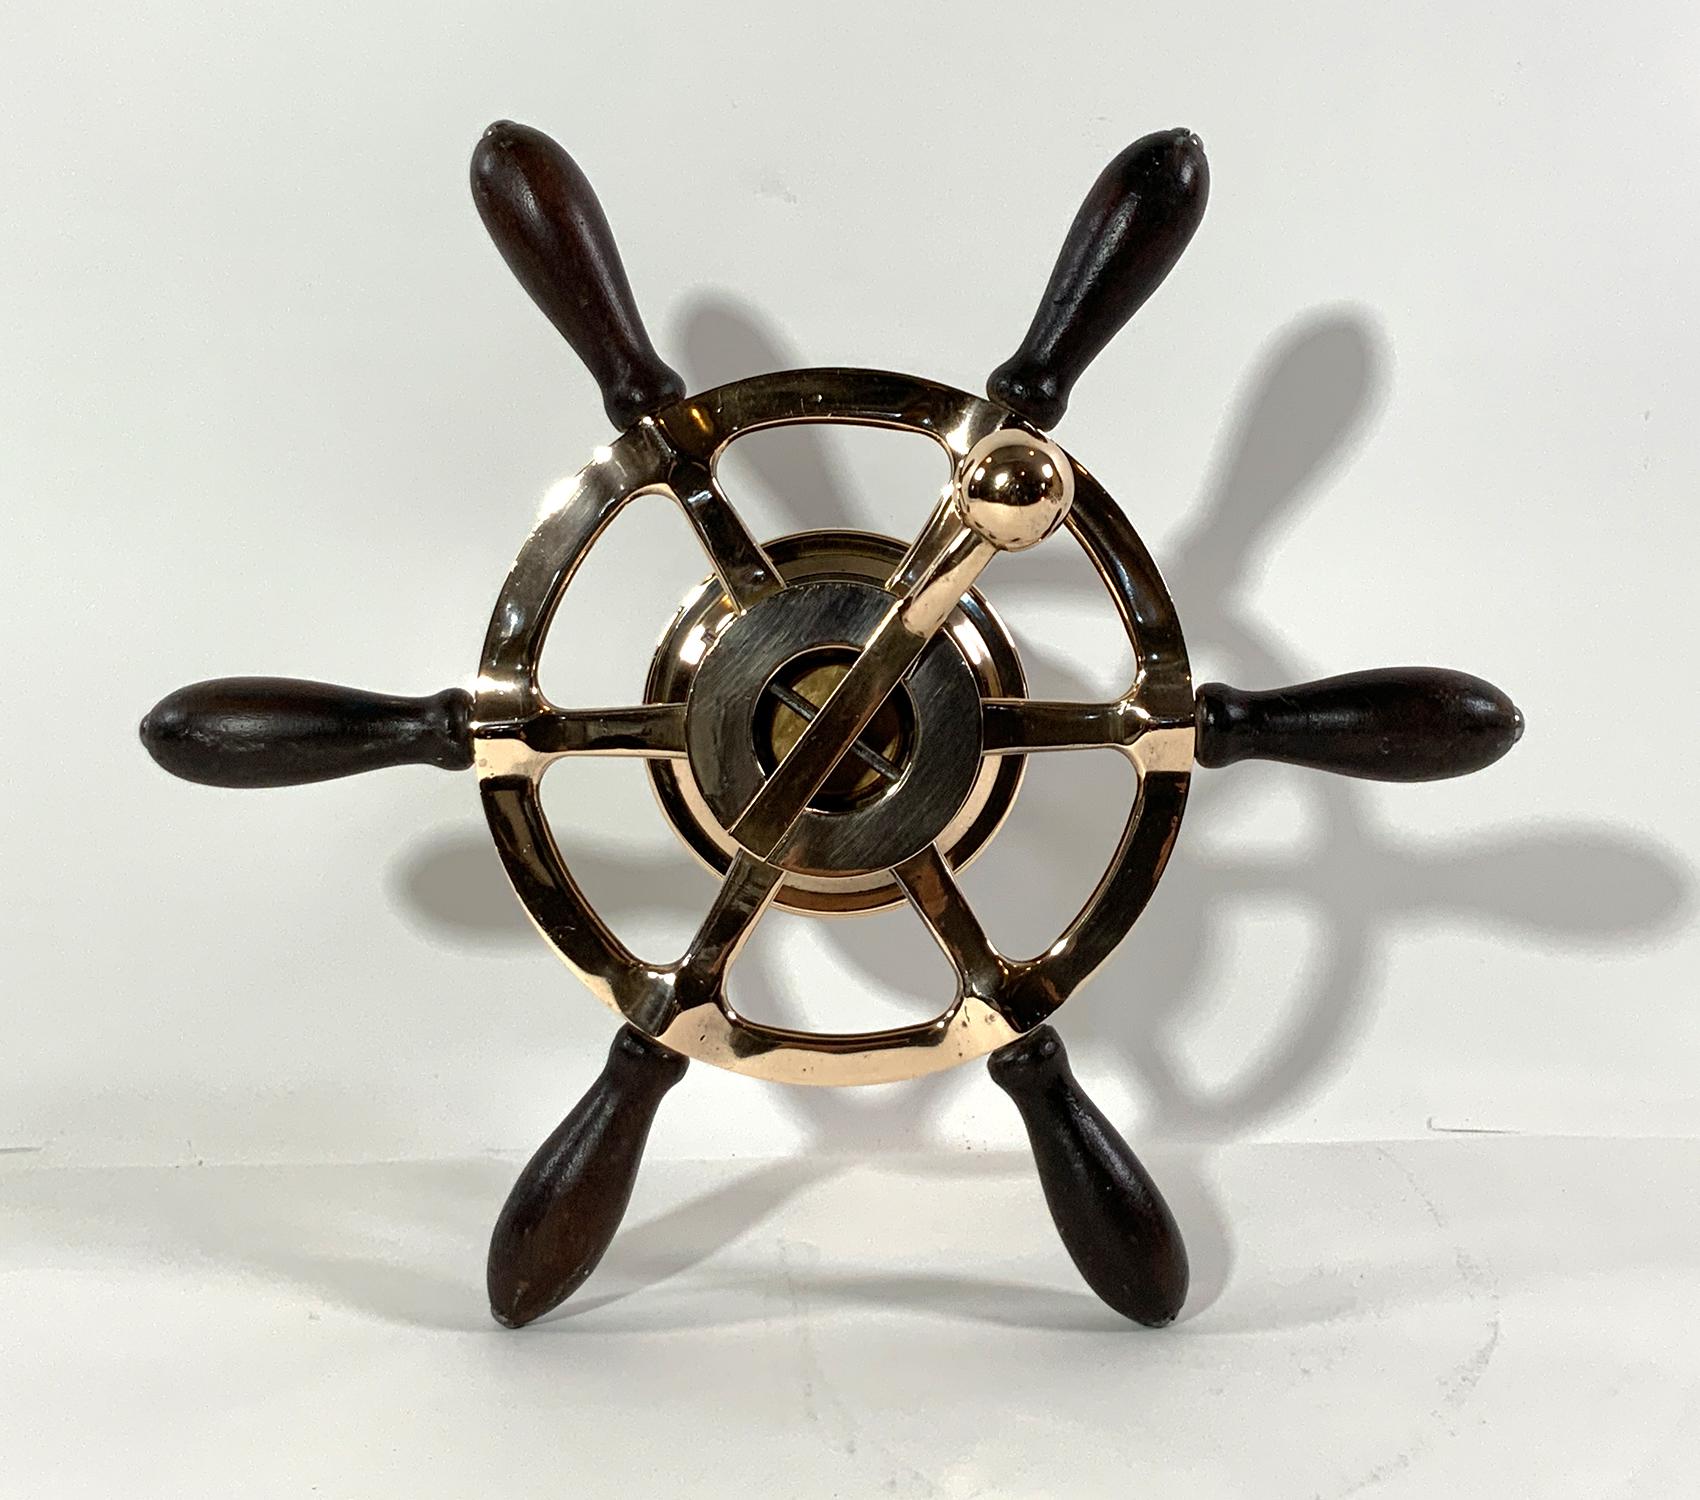 Rare late 19th century Launch steering wheel with gear lever. Six spoke with wood handles. Highly polished. Tip to tip 15.5; depth 6.75